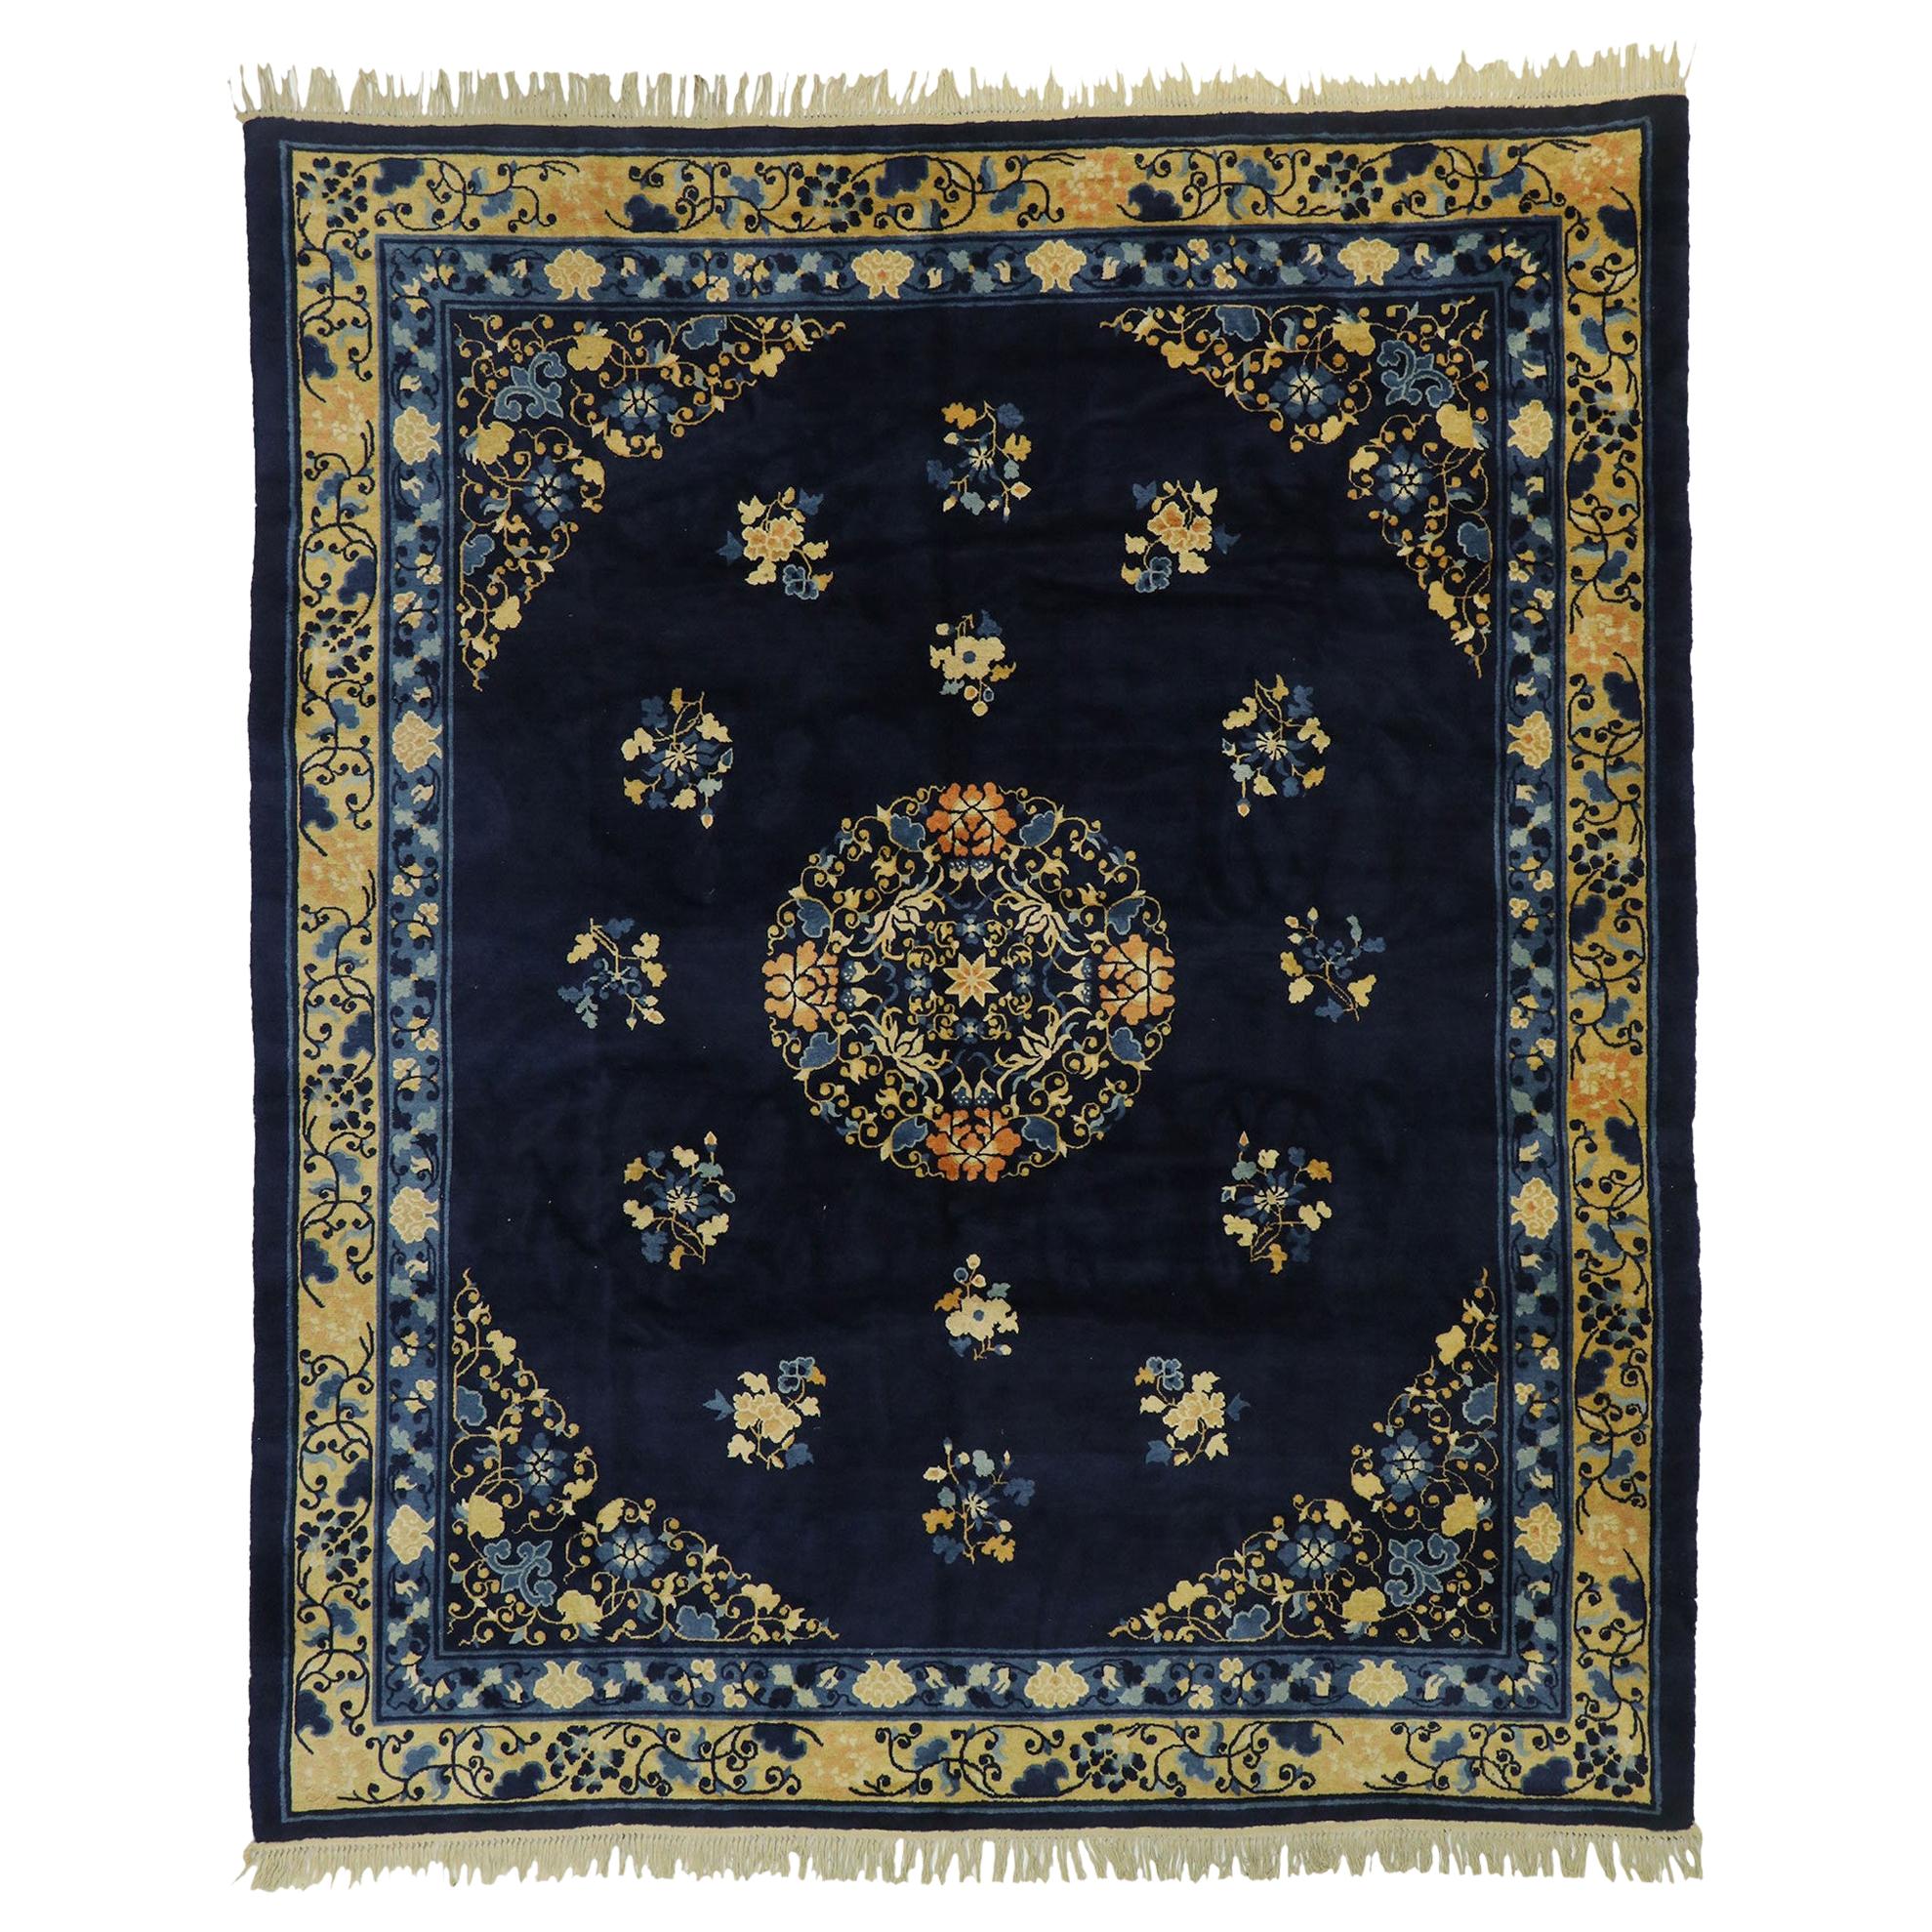 Tapis chinois pékinois ancien avec style traditionnel chinoiserie